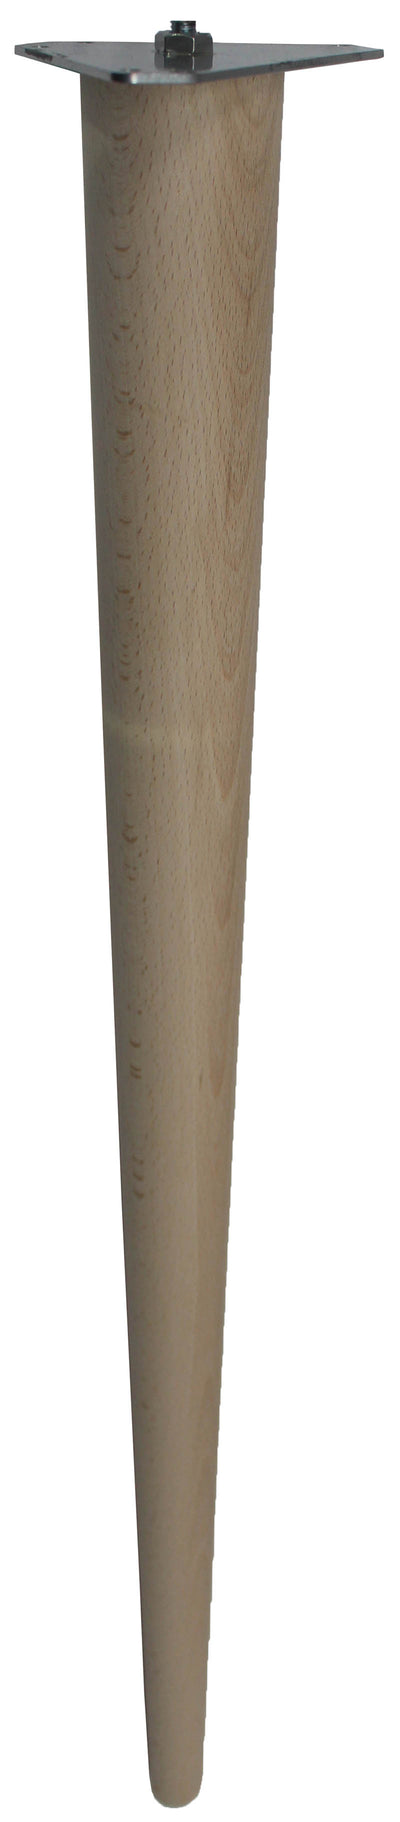 McCobb Table Legs Standard - Raw Finish - Set of 4 - Including Universal Fixing Plates and Screws